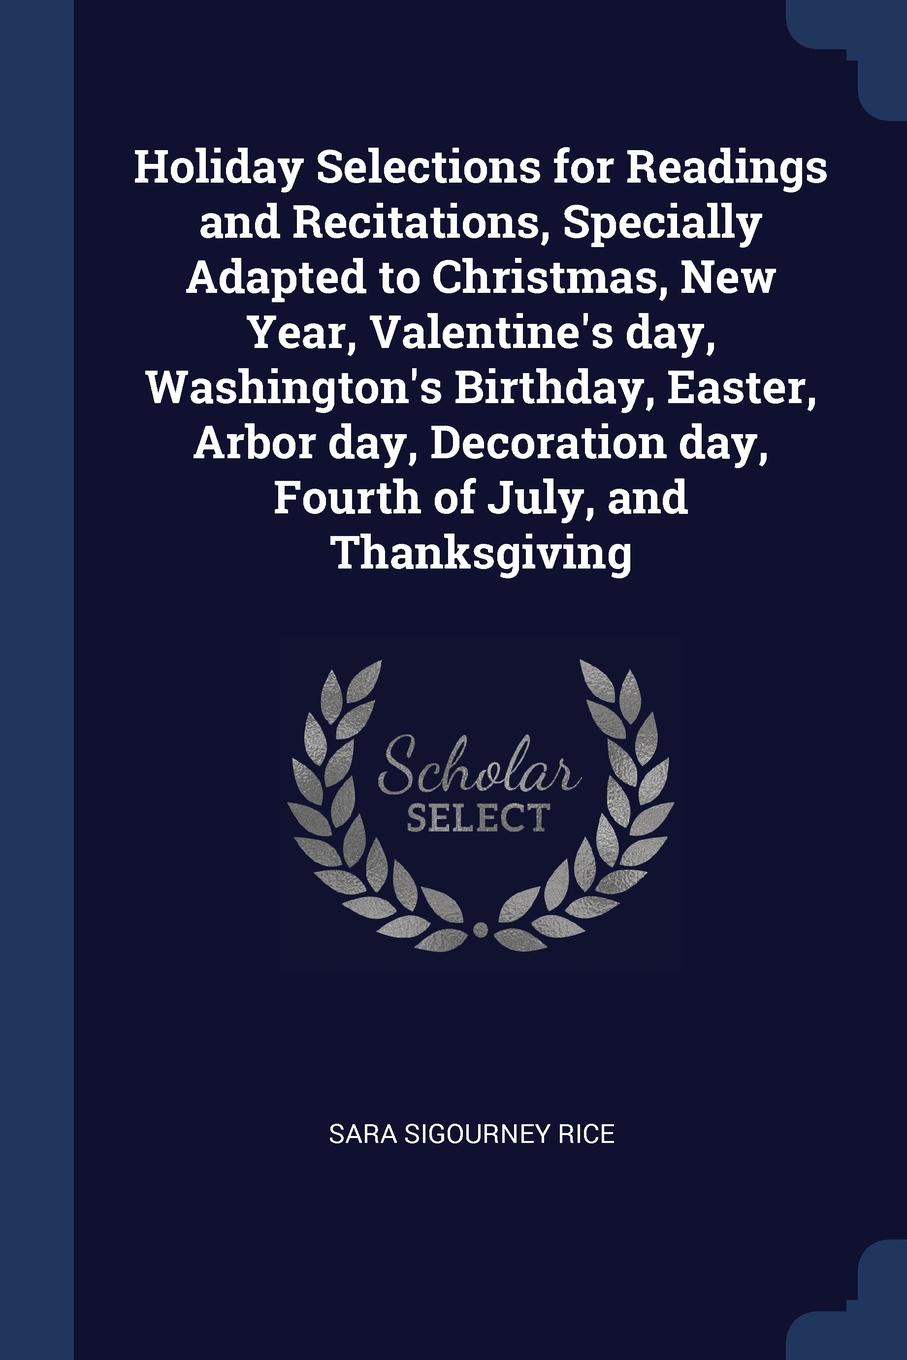 Holiday Selections for Readings and Recitations, Specially Adapted to Christmas, New Year, Valentine.s day, Washington.s Birthday, Easter, Arbor day, Decoration day, Fourth of July, and Thanksgiving